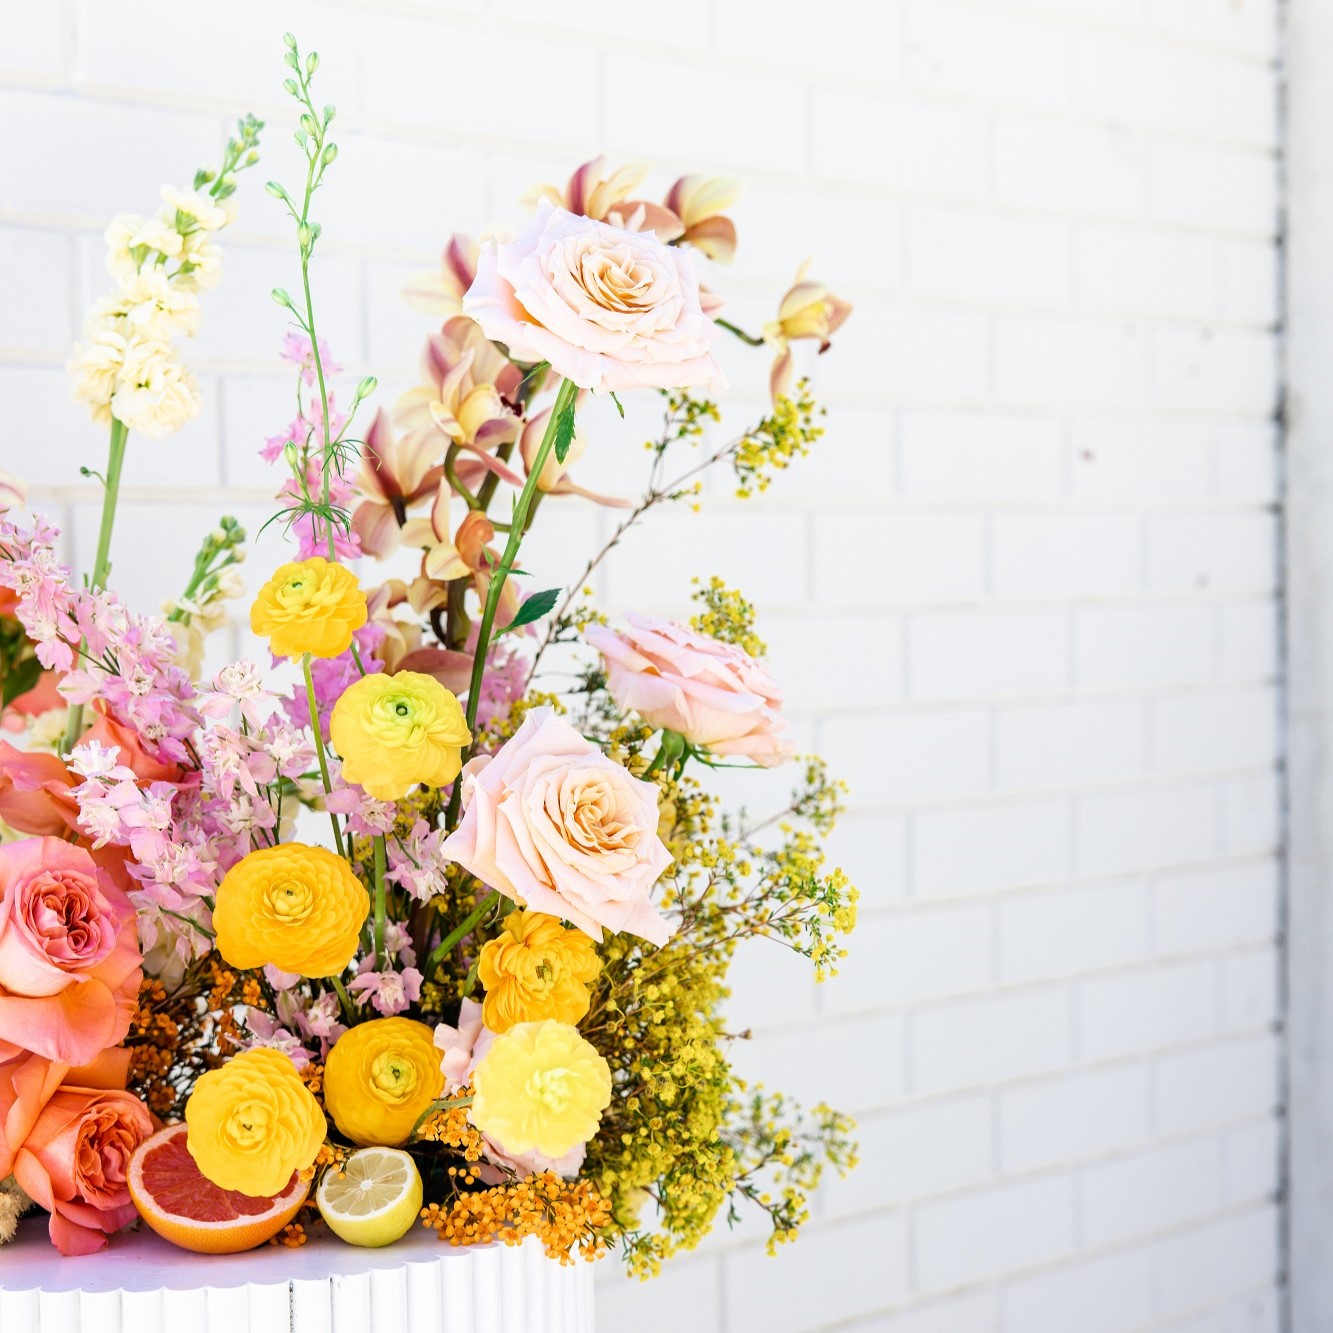 Wedding styling trends to watch in 2023, bright citrus wedding styling